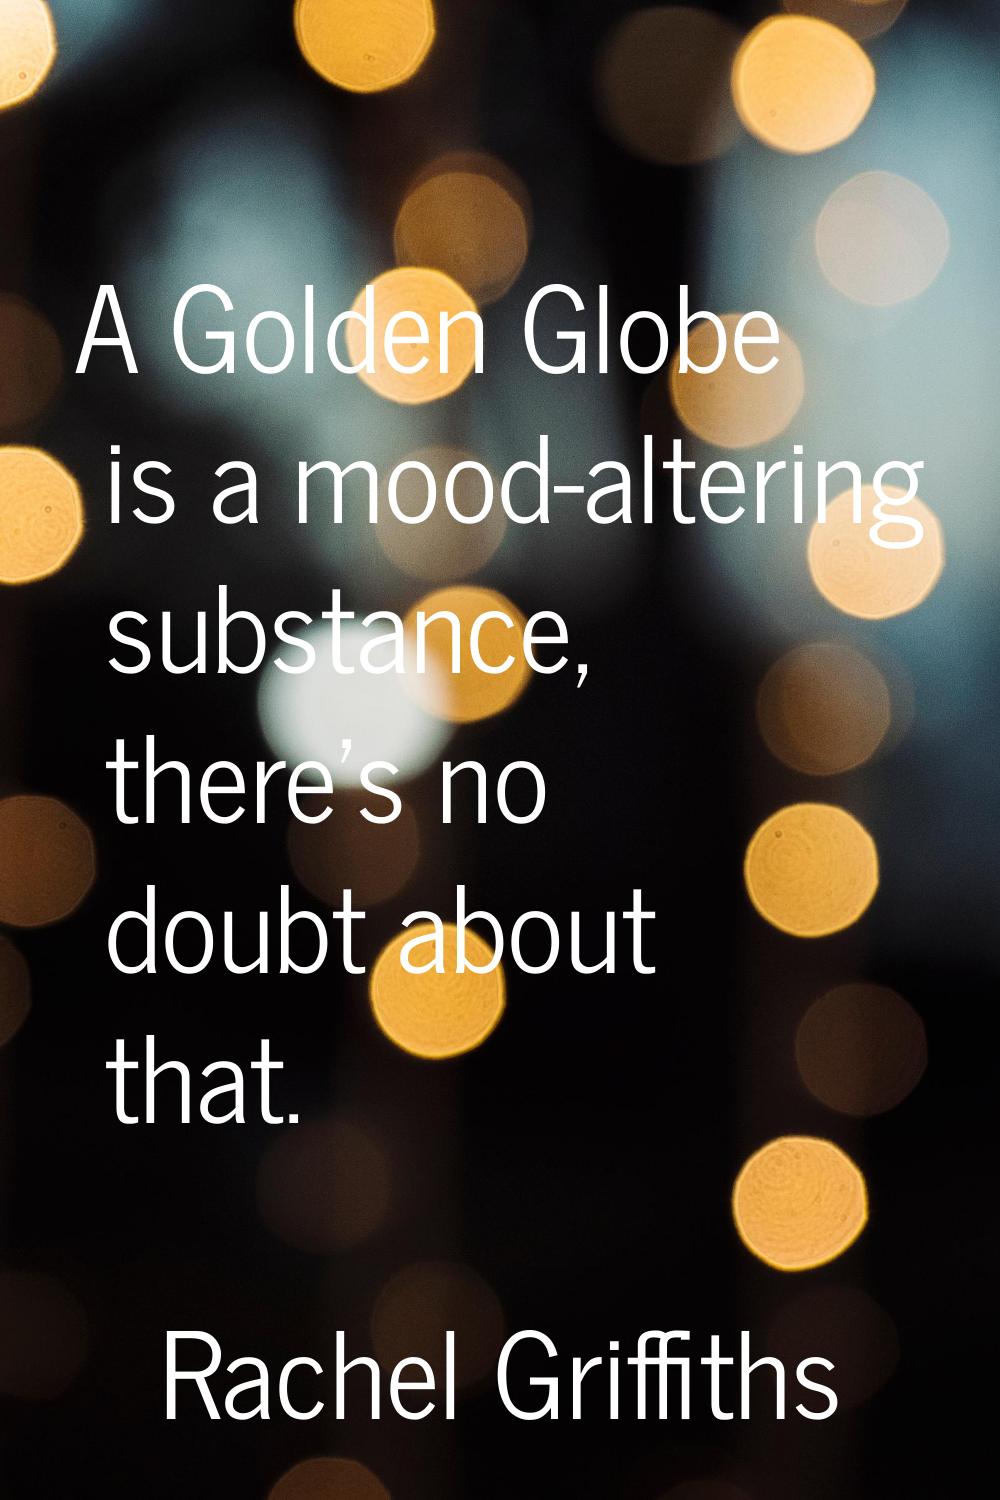 A Golden Globe is a mood-altering substance, there's no doubt about that.